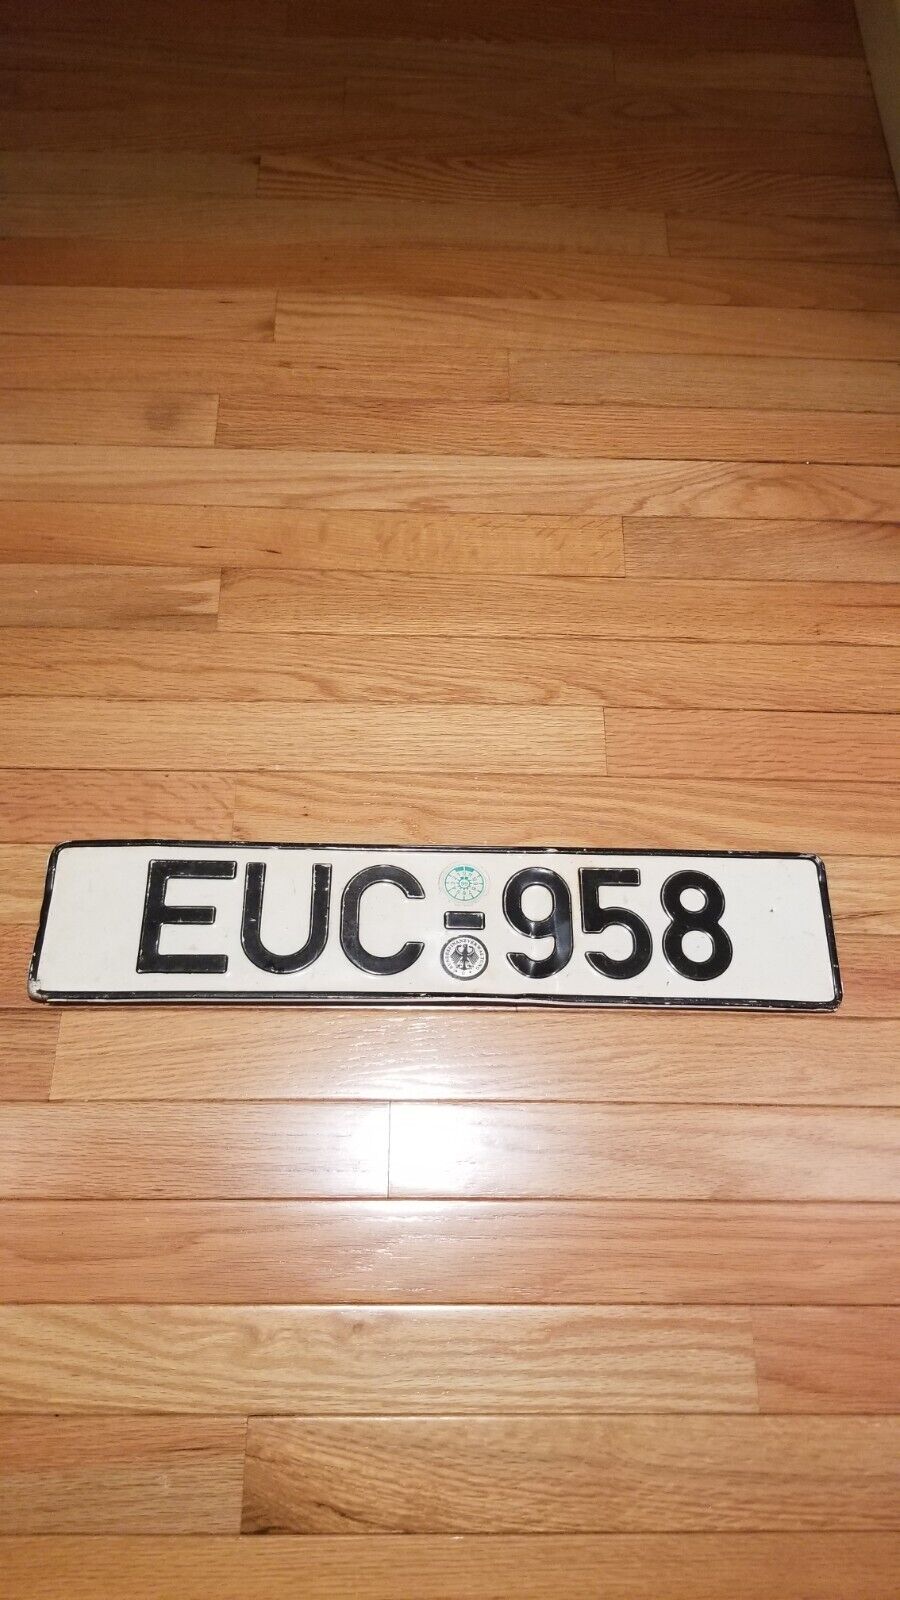  German License Plate Authentic 1999